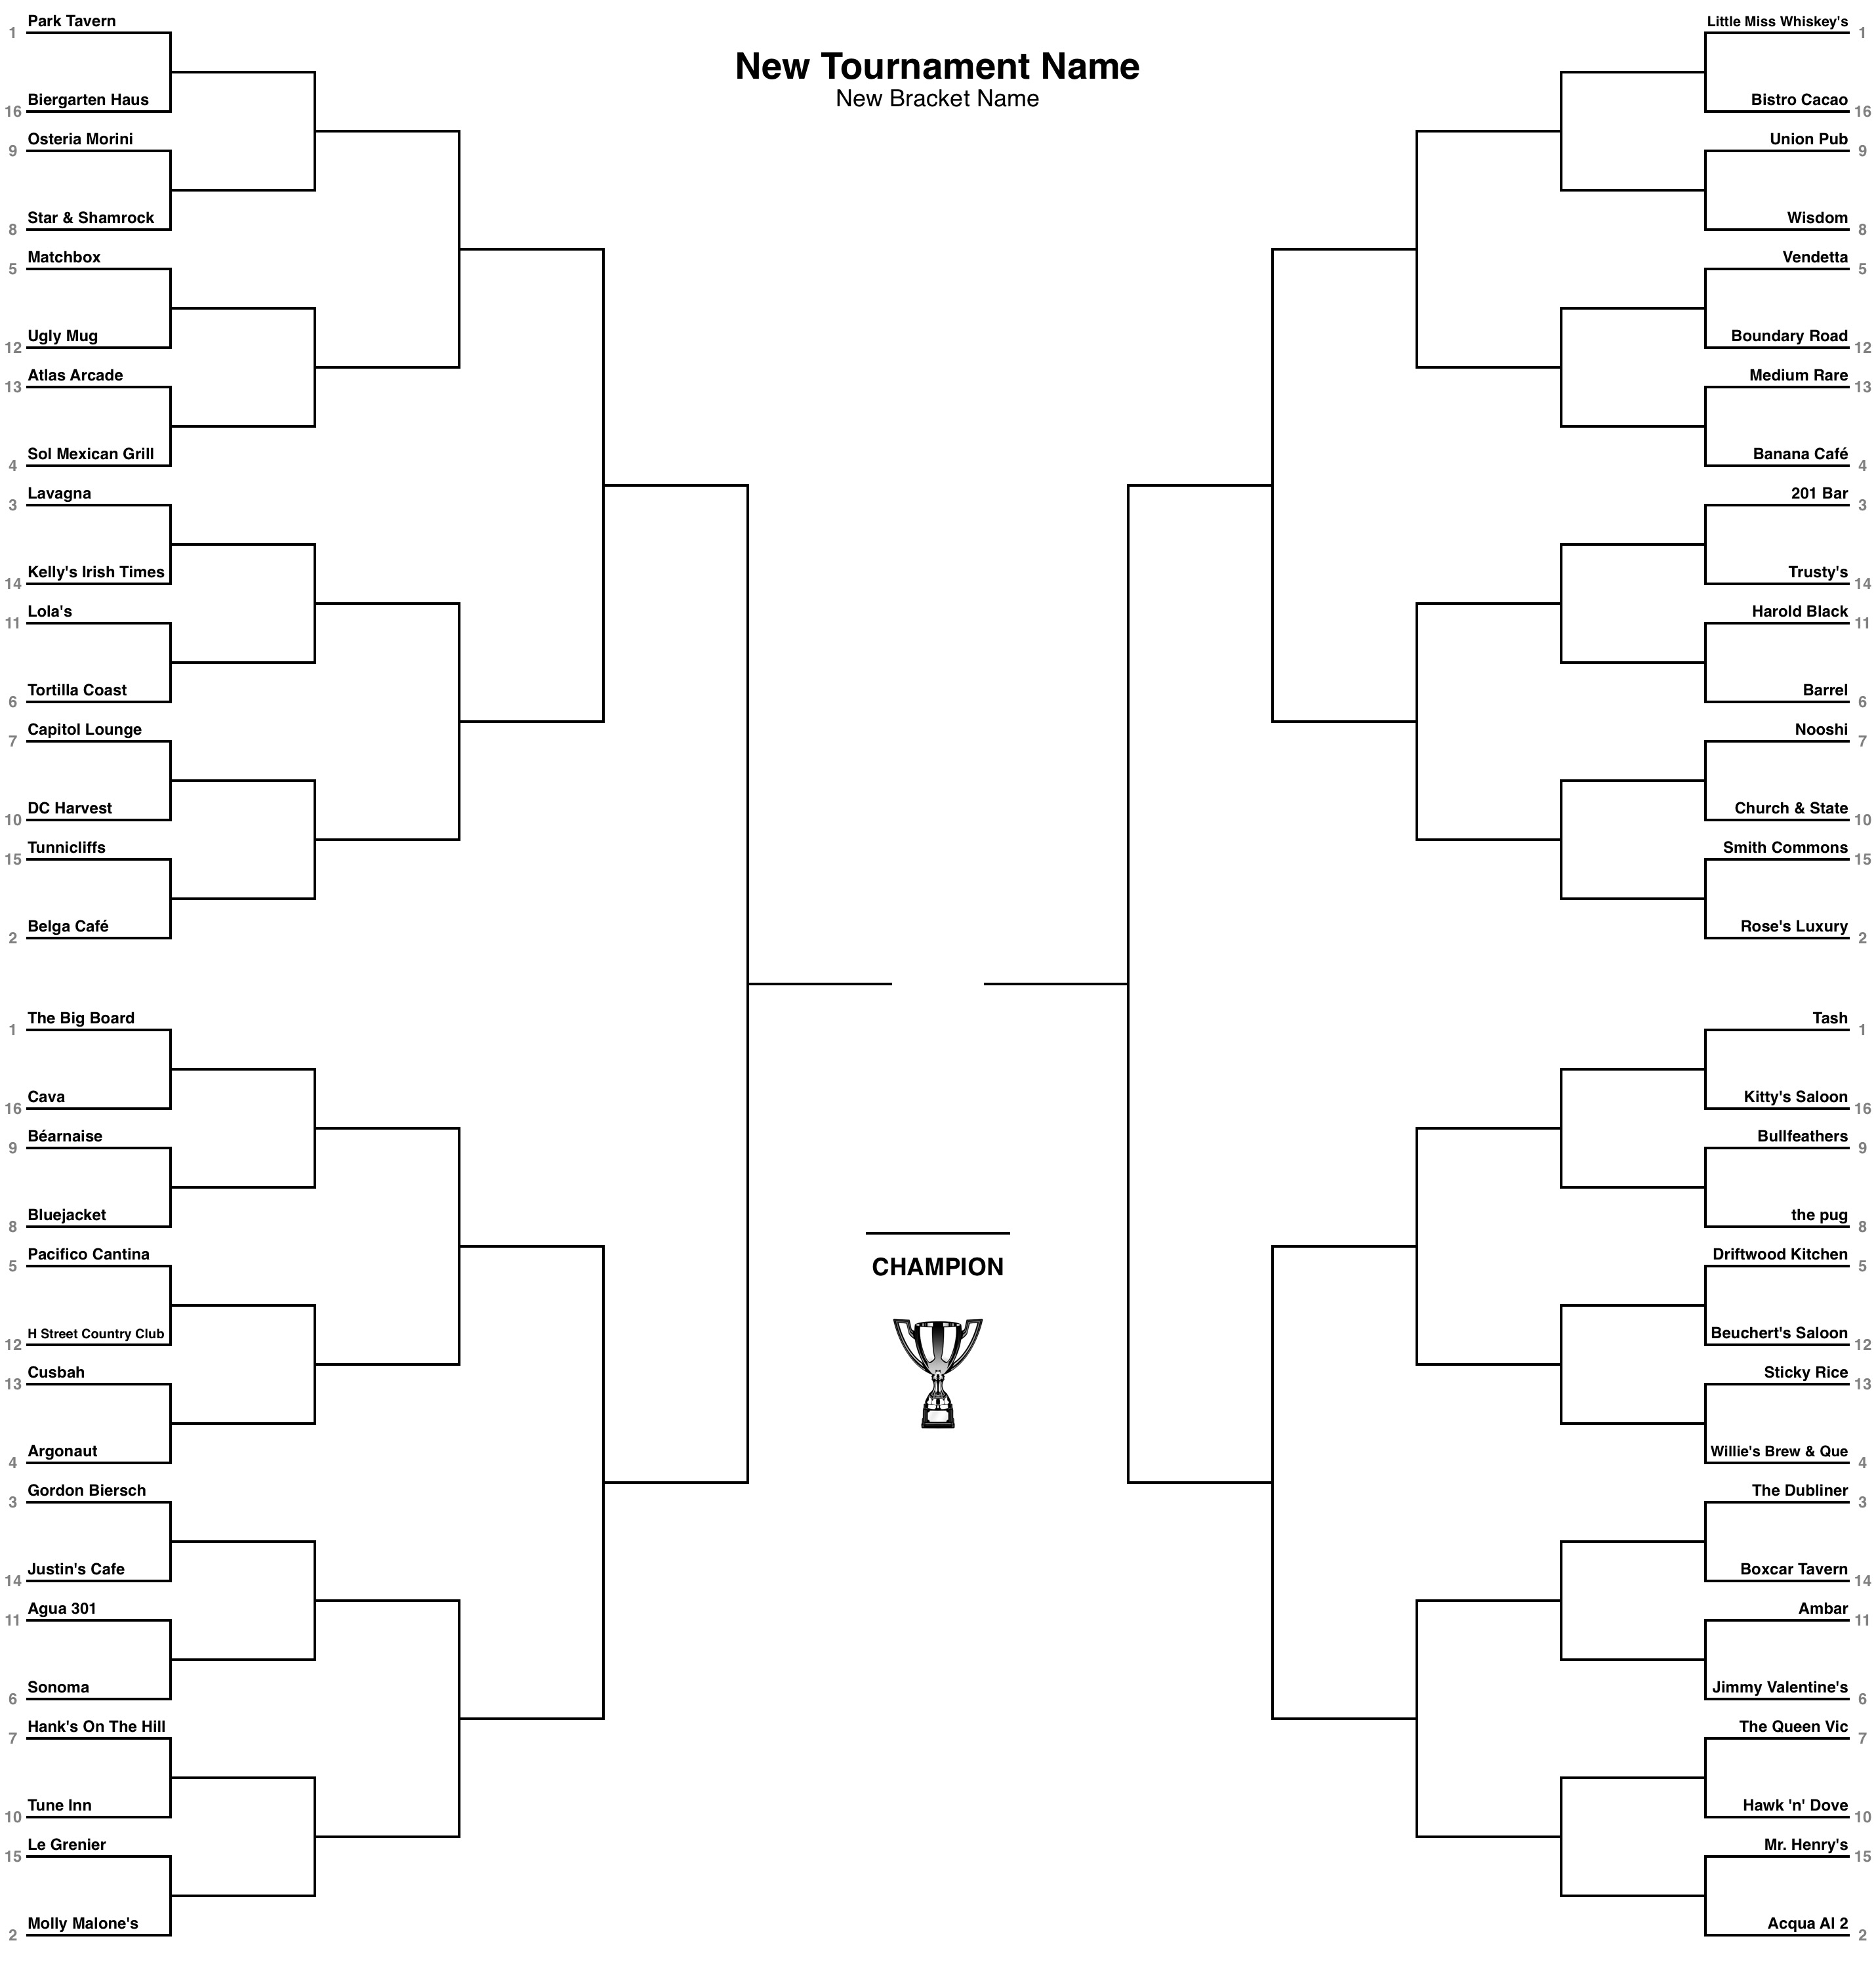 Our Bar Madness 2015 bracket. Behold its beauty and good luck to all players!